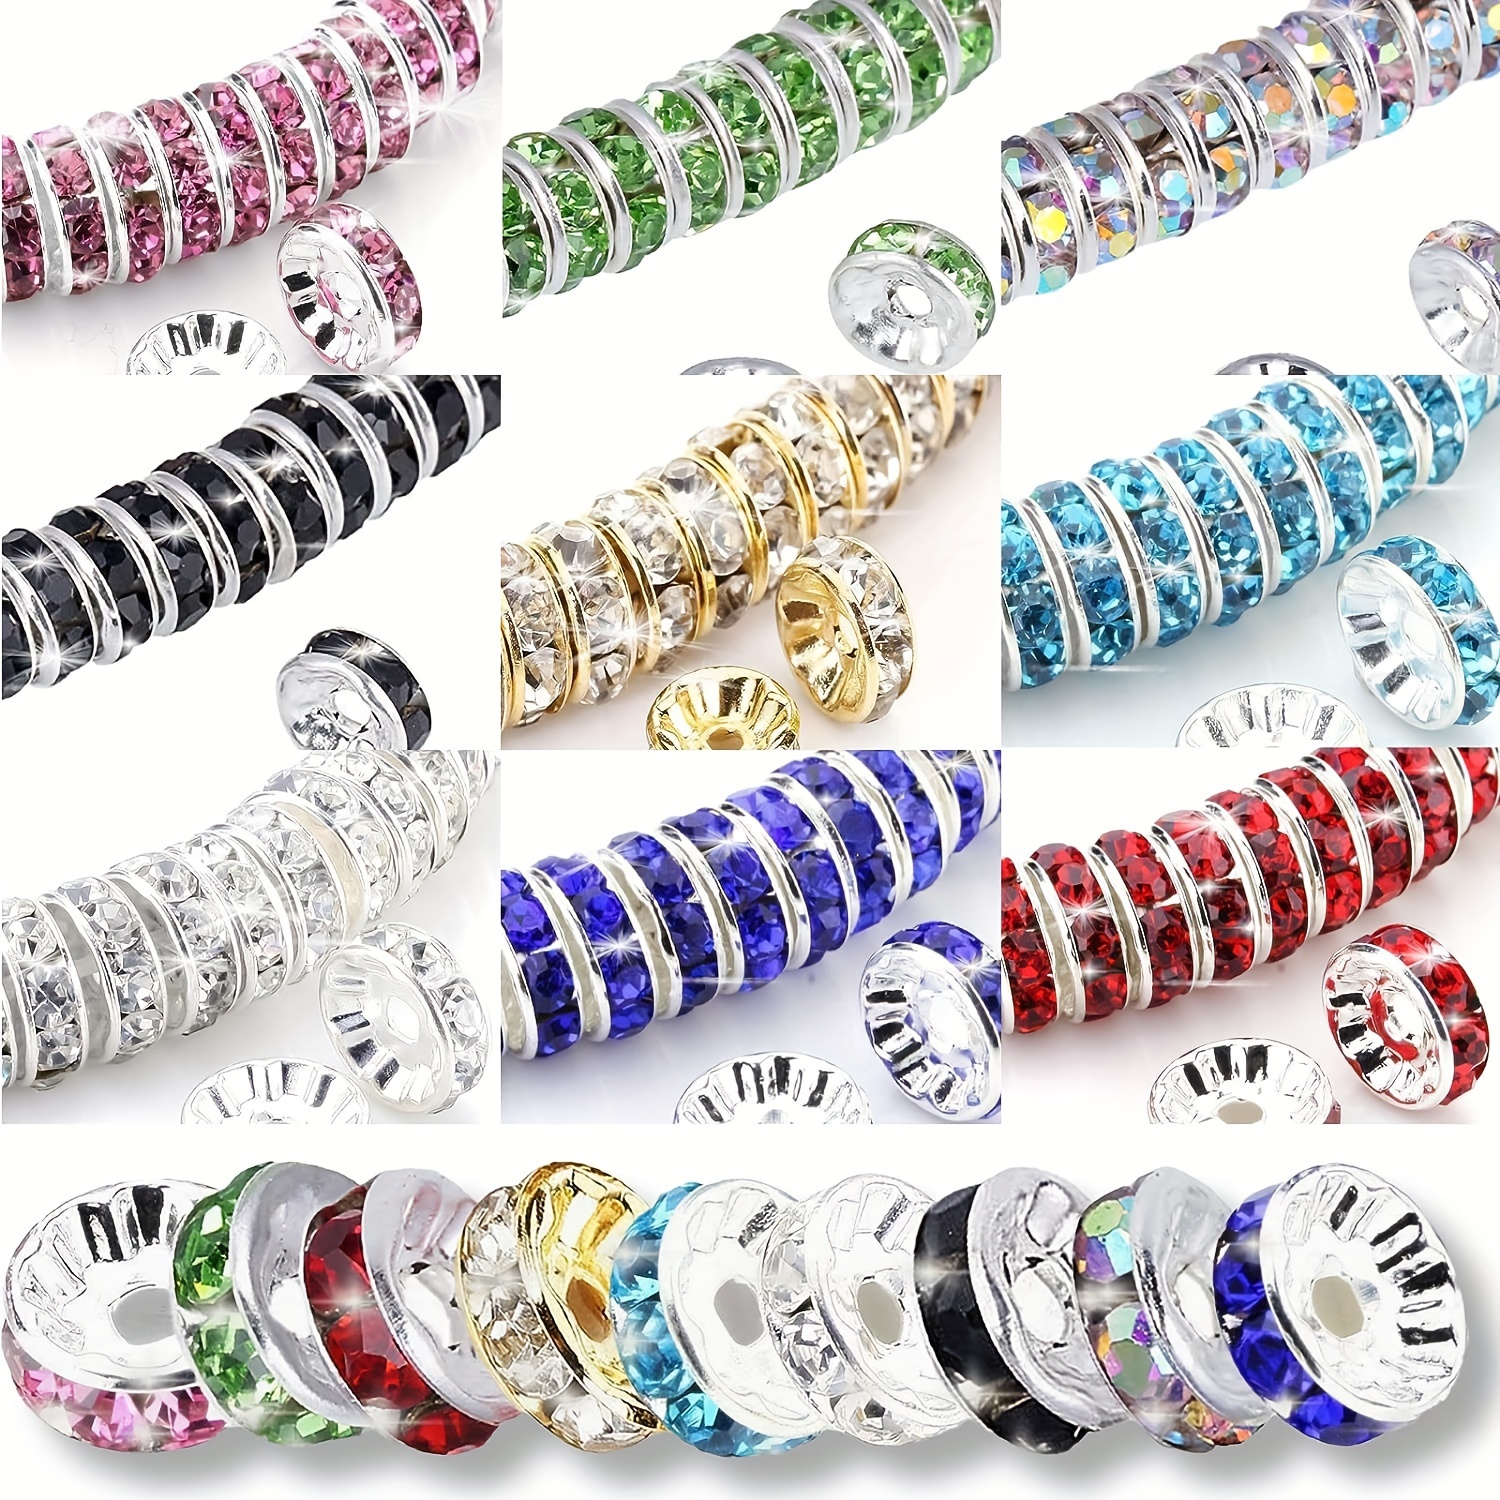 

1080pcs 8mm Round Spacer Beads, Crystal Beads, Rhinestone Beads, Charms Beads For Jewelry Making Necklaces, Bracelet Pendants